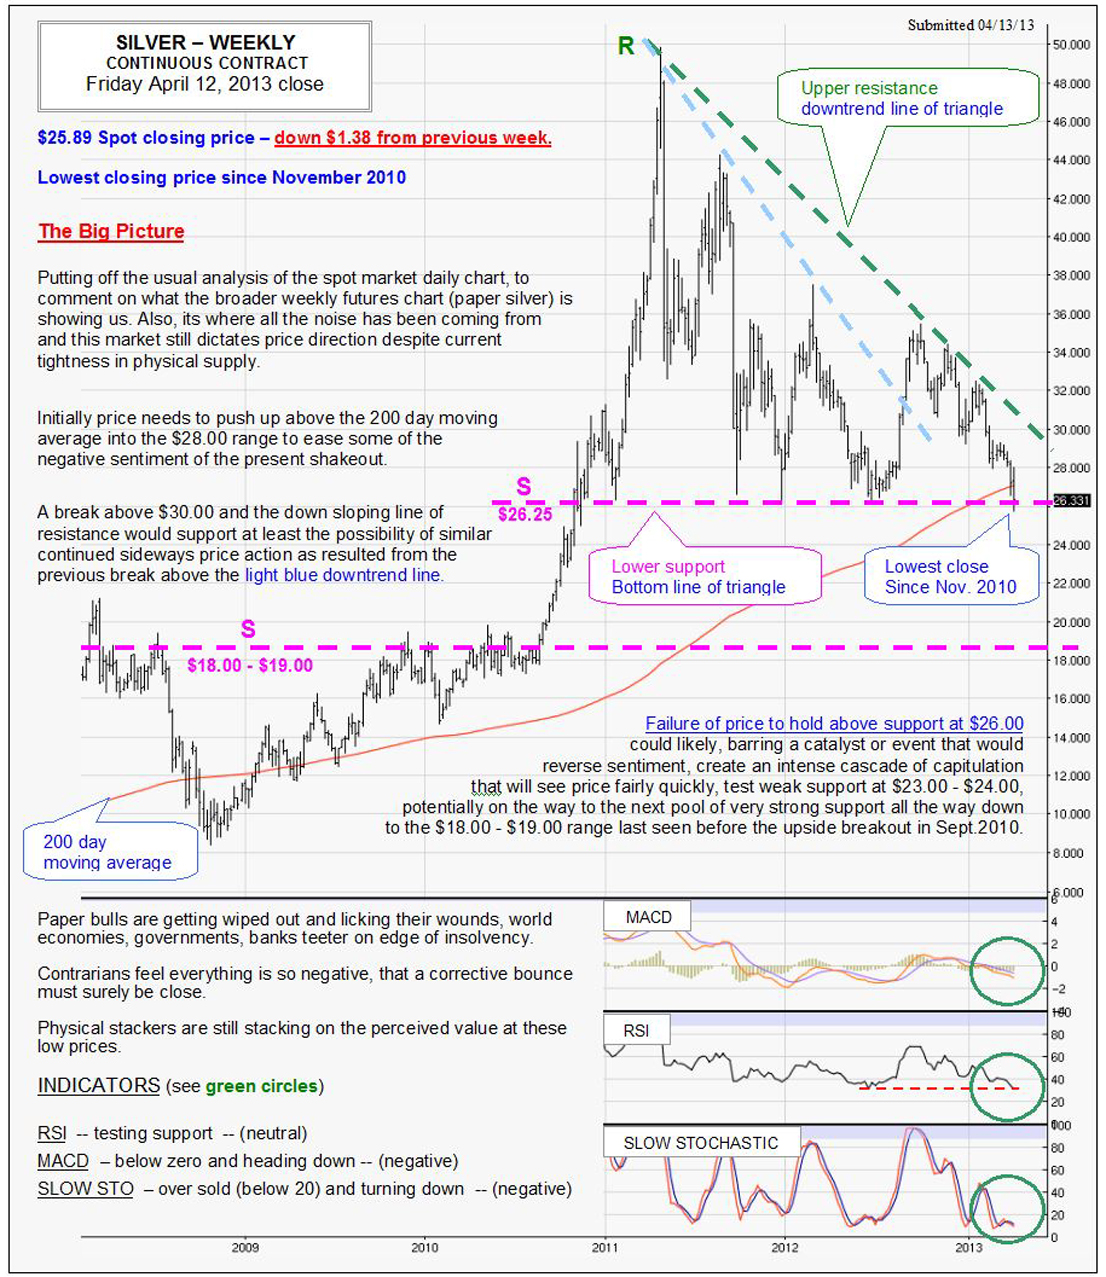 APRIL 12, 2013 chart & commentary